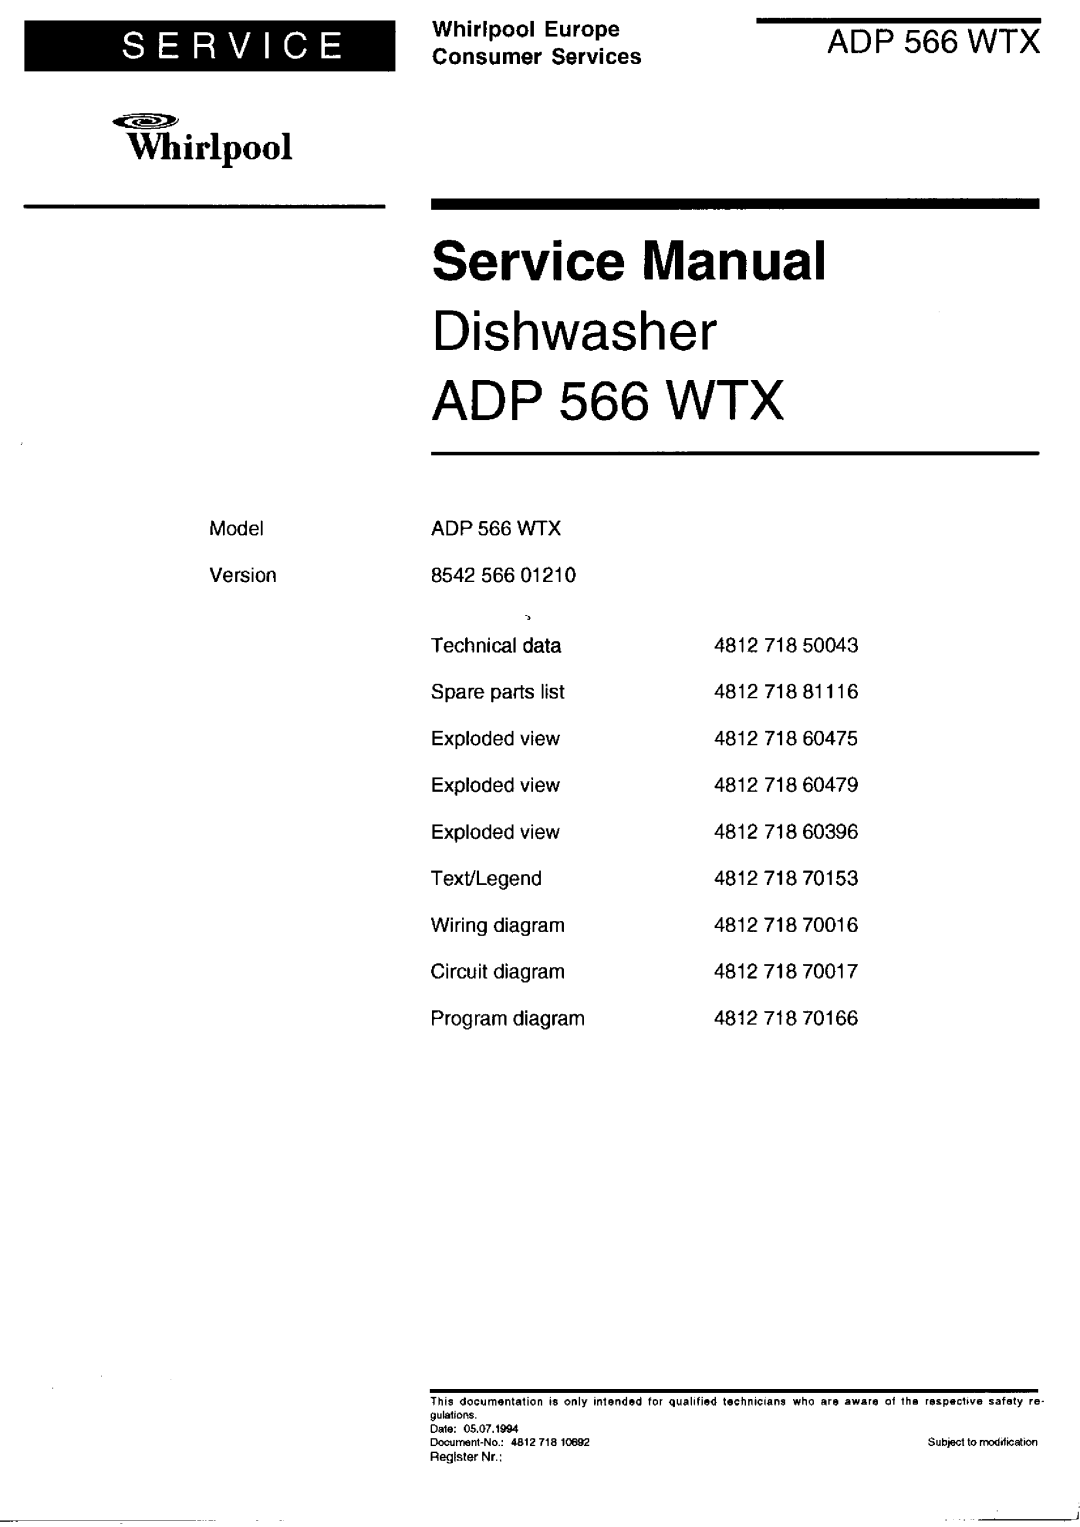 Whirlpool ADP 566 WTX service manual AD P 566 WTX, 3 = l ~ ~ -= ~, WhirlpoolEurope, ConsumerServices, Dishwasher 